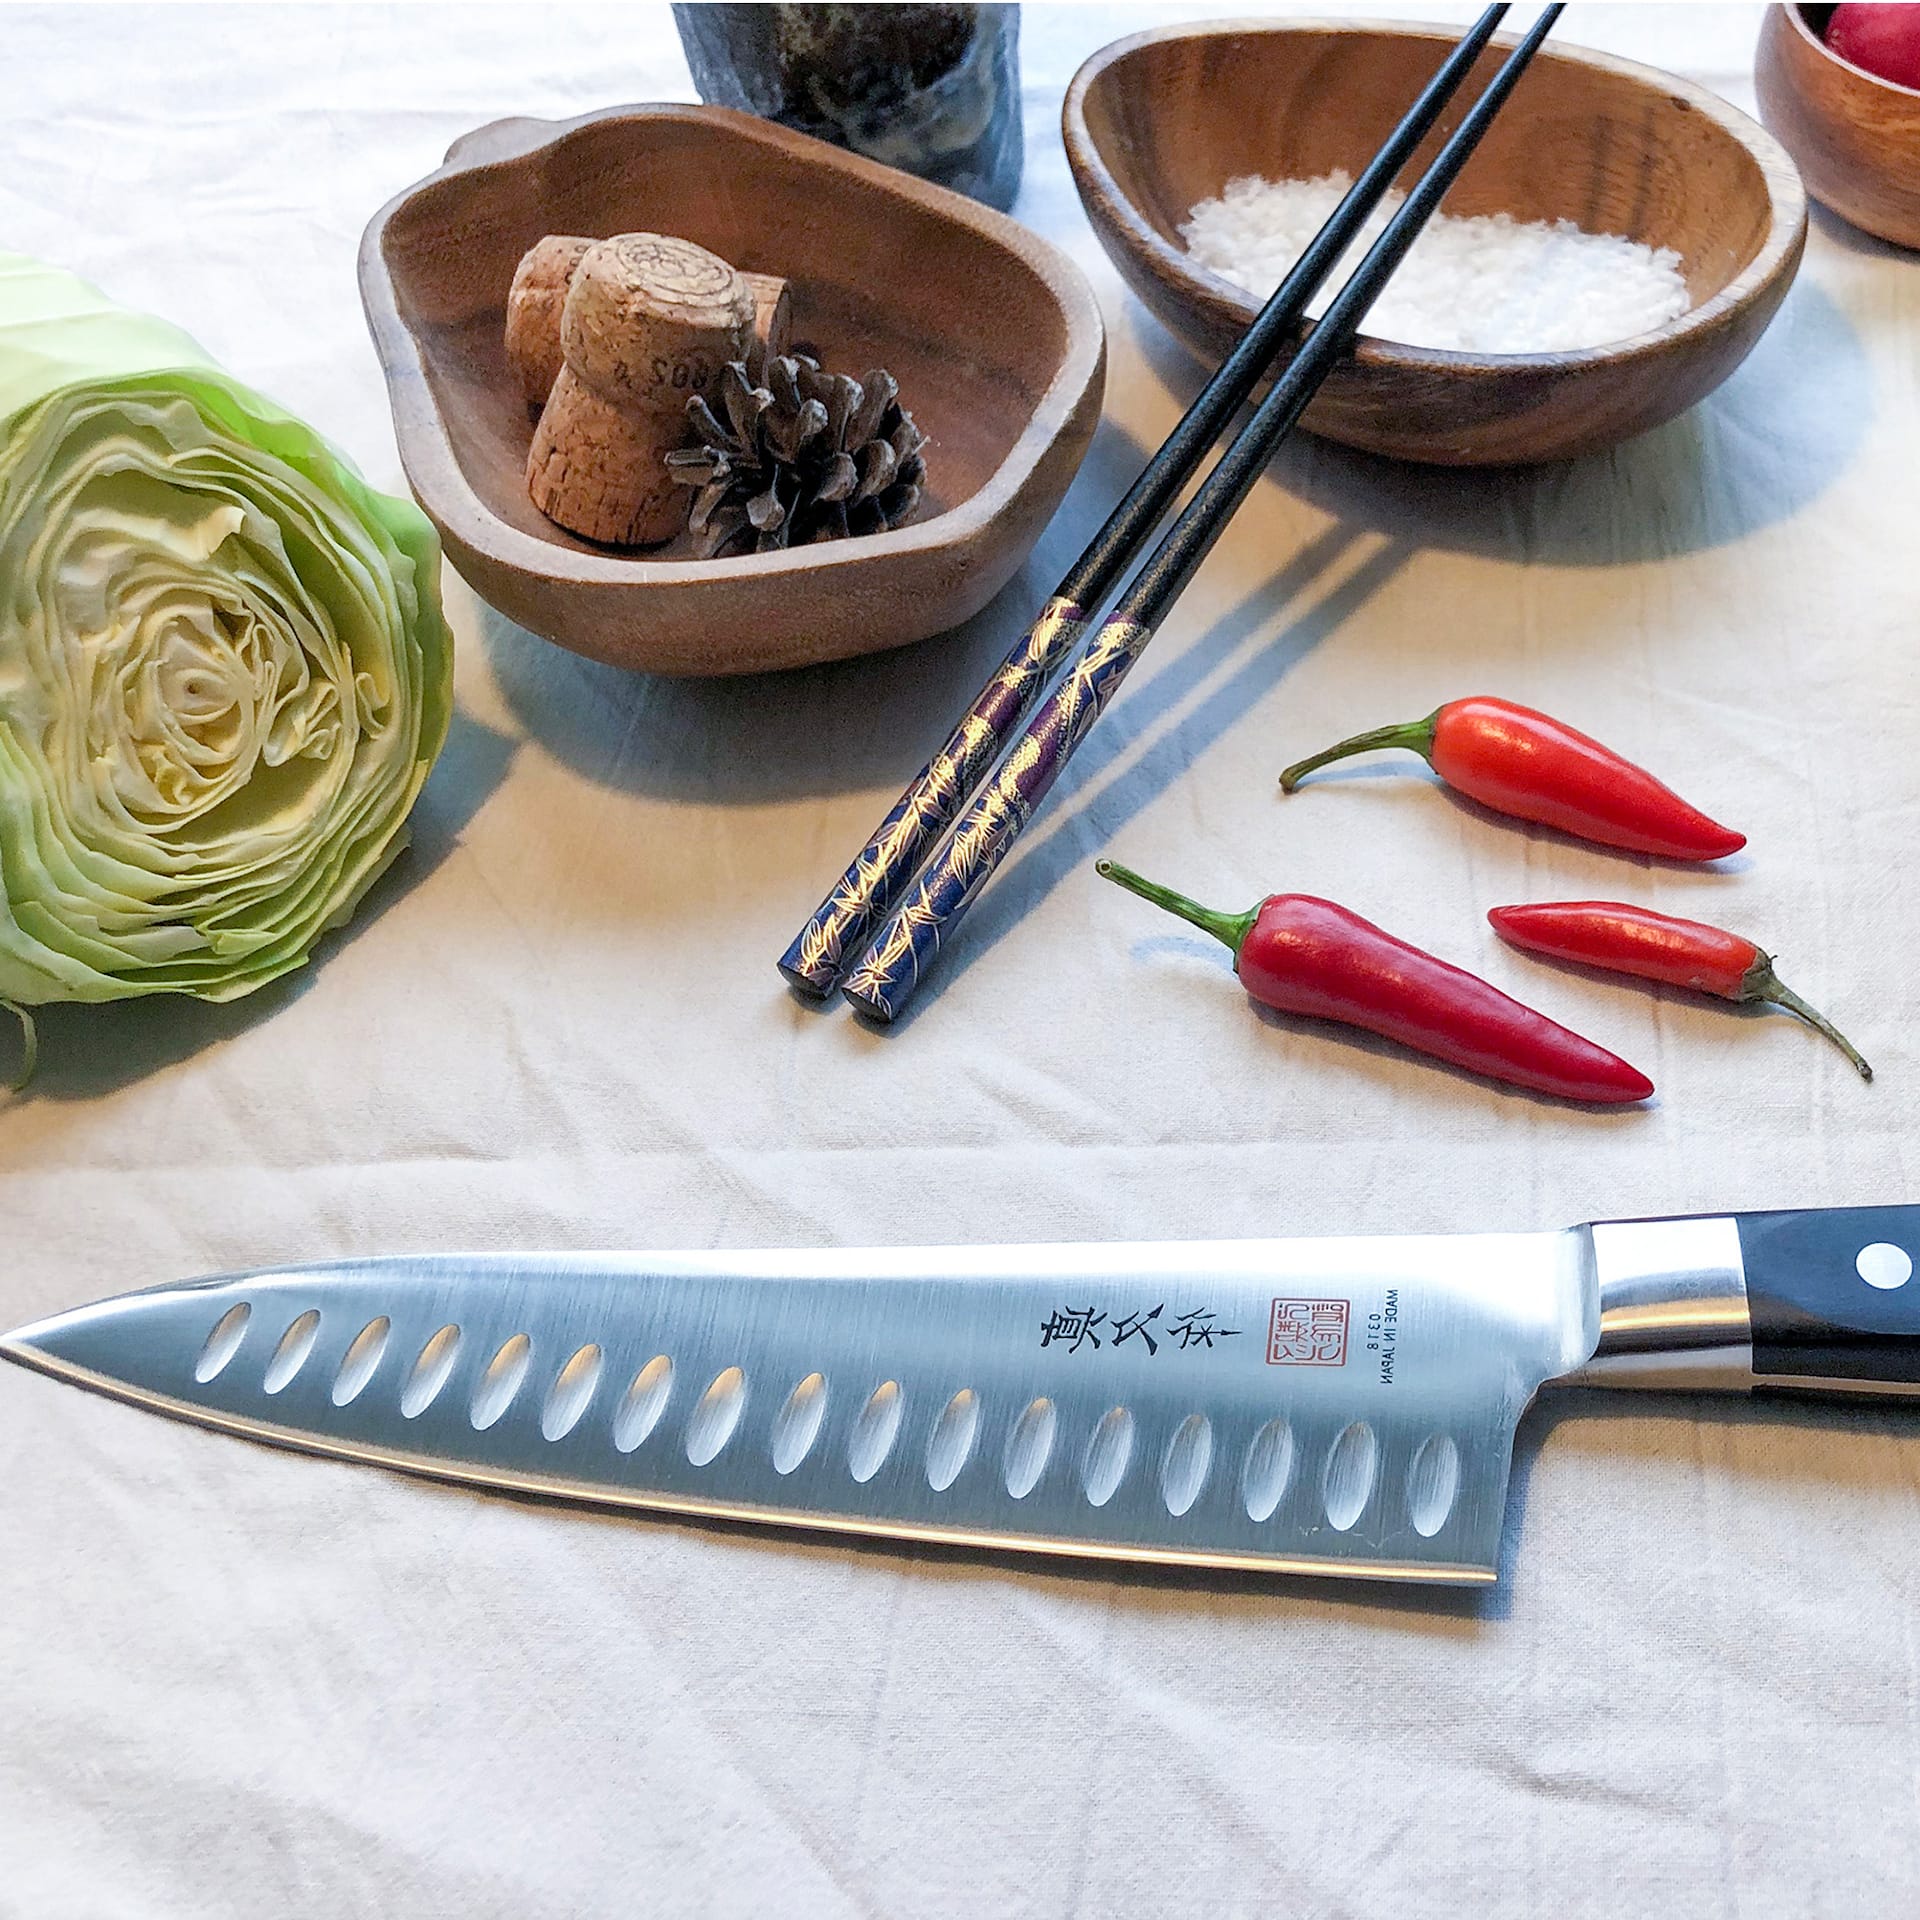 Mighty - Chef's knife with olive sharpening, 20 cm - MAC - NO GA